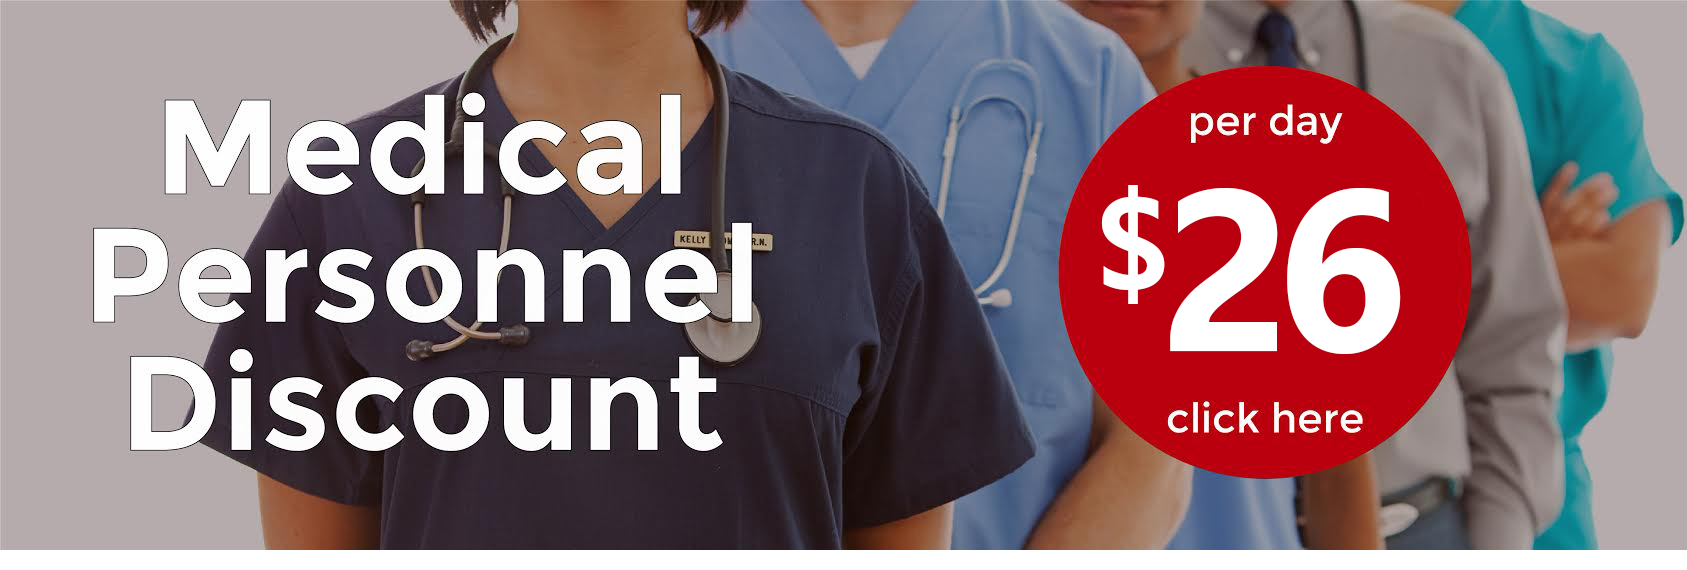 Medical Student Discount